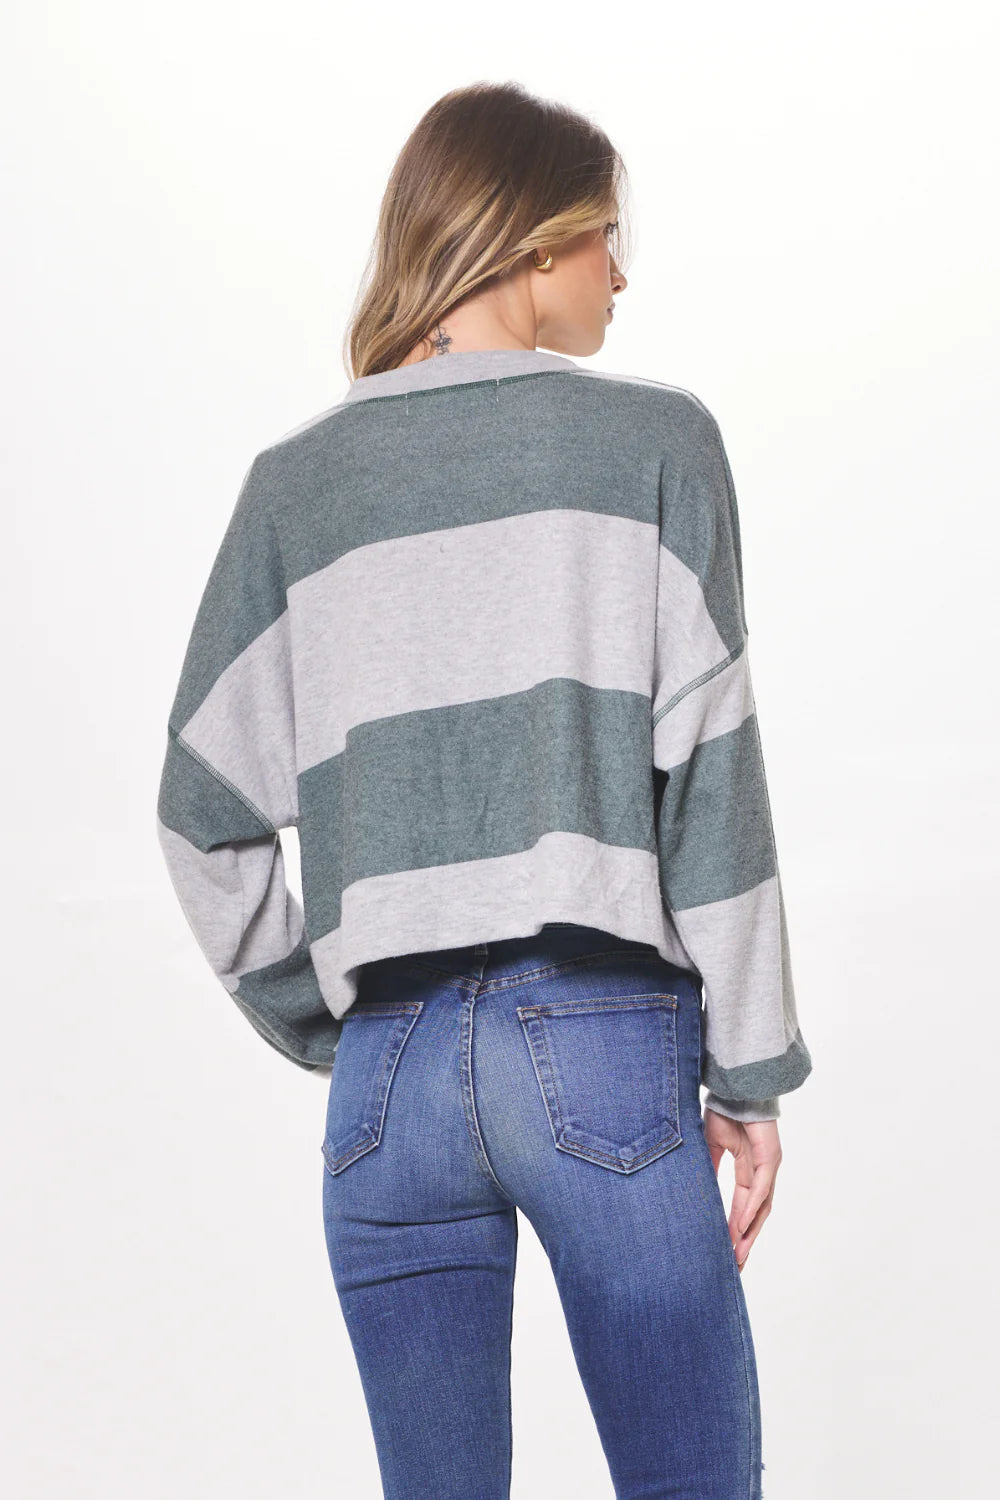 HEATHER GREY & HUNTER GREEN STRIPED RUGBY LONG SLEEVE TOP